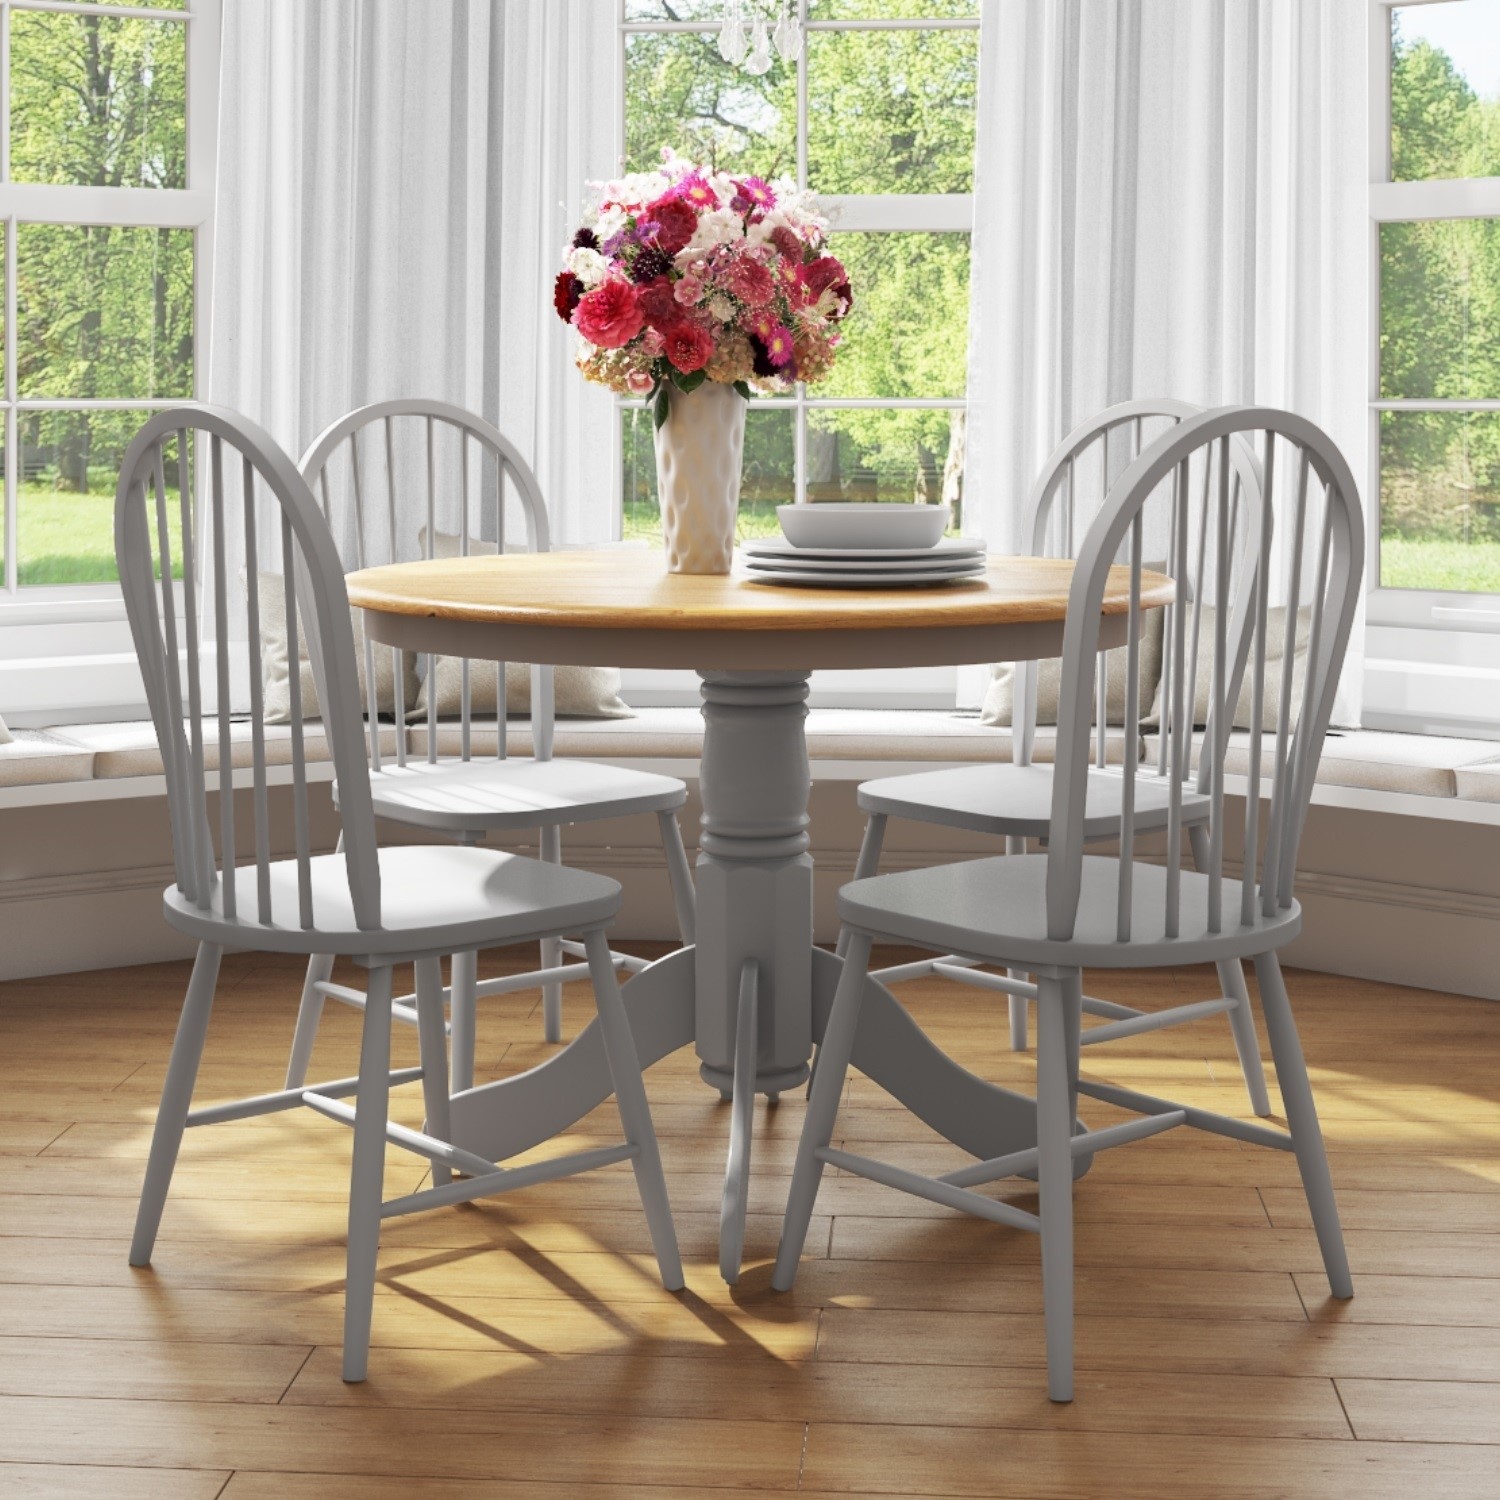 Small Round Table With 4 Chairs : Cream Round Extending Table With 4